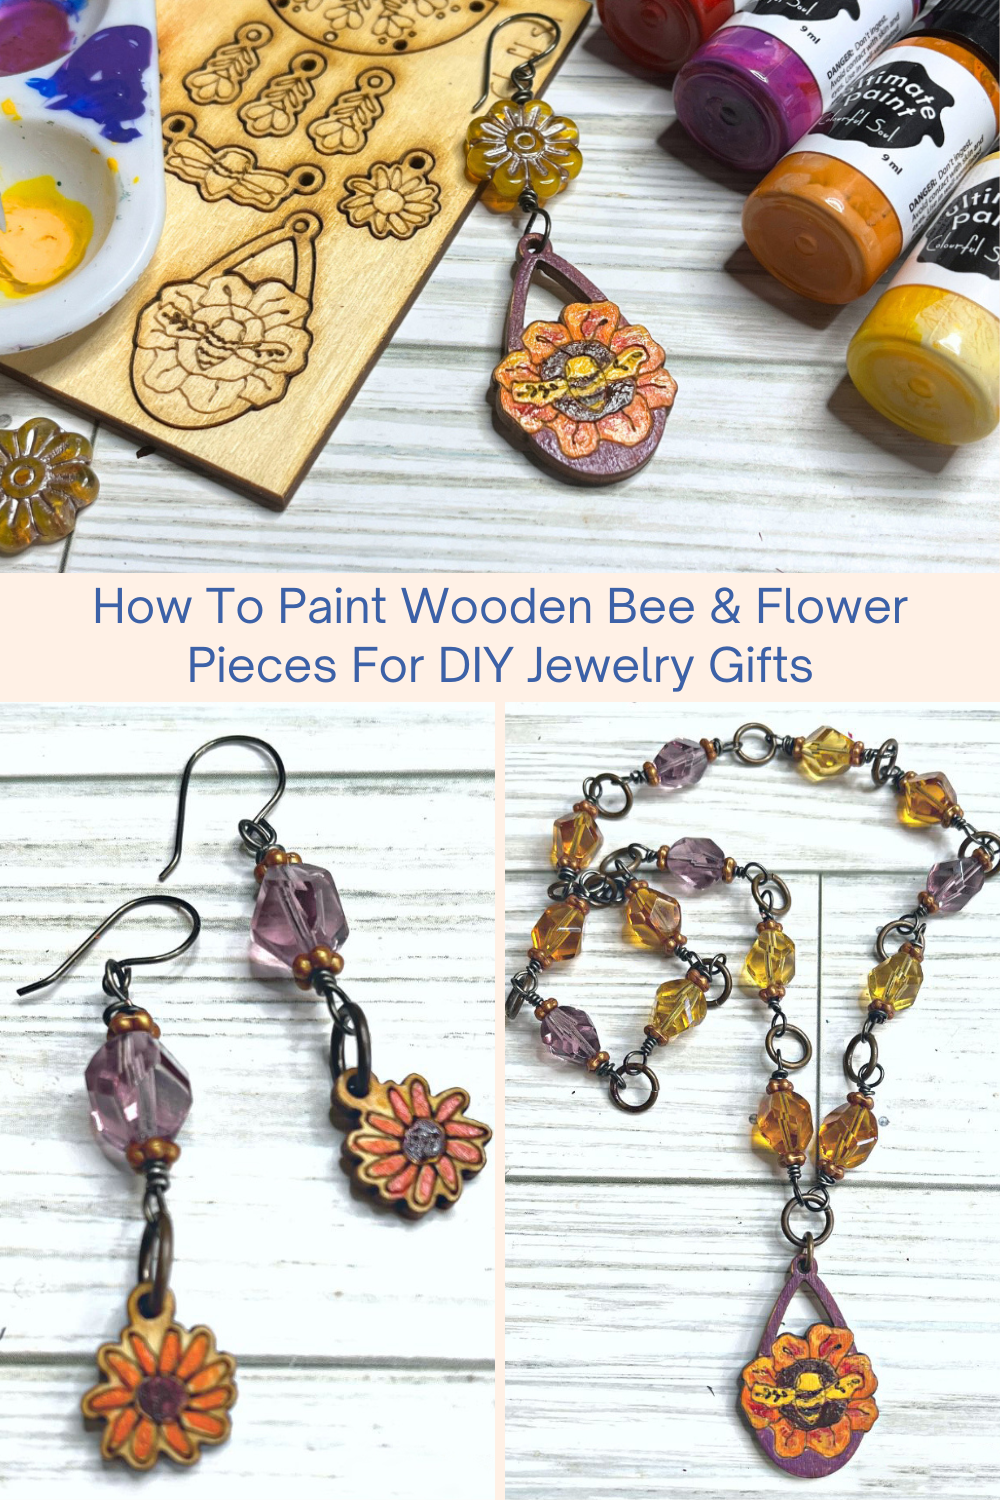 How To Paint Wooden Bee & Flower Pieces For DIY Jewelry Gifts Collage